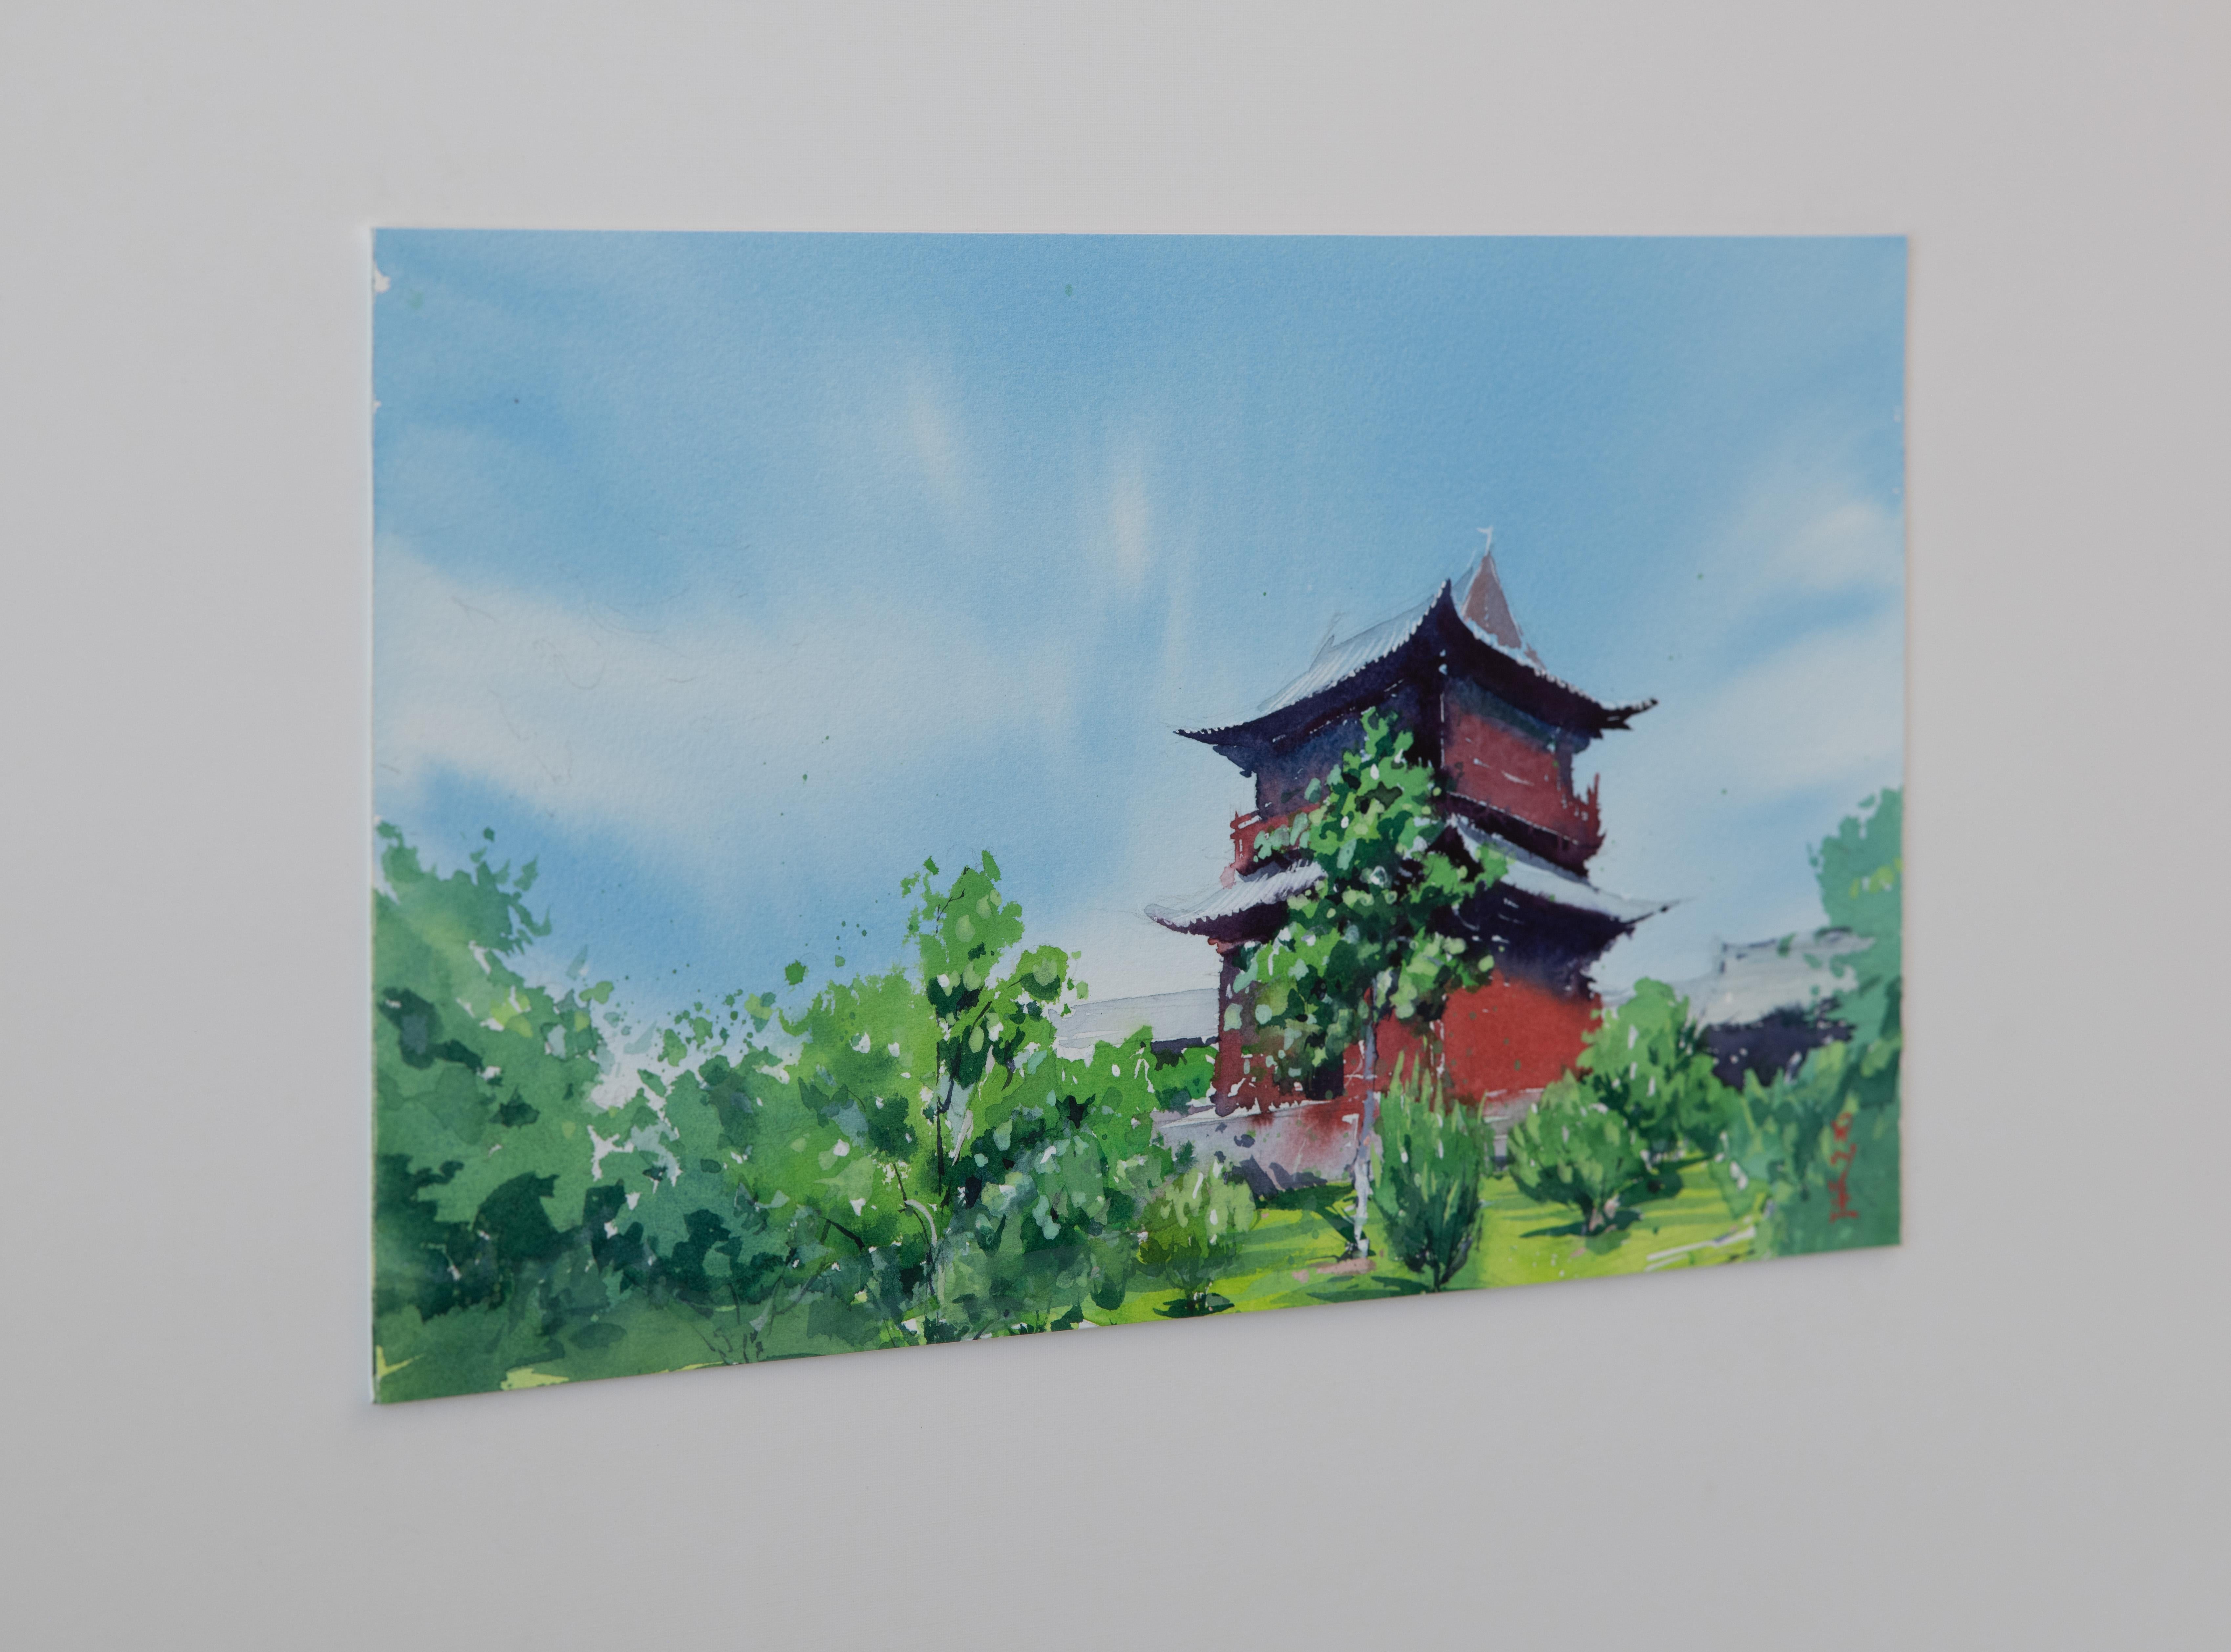 Watercolor Impressions of Chinese Architecture 7, Original Painting - Art by Siyuan Ma